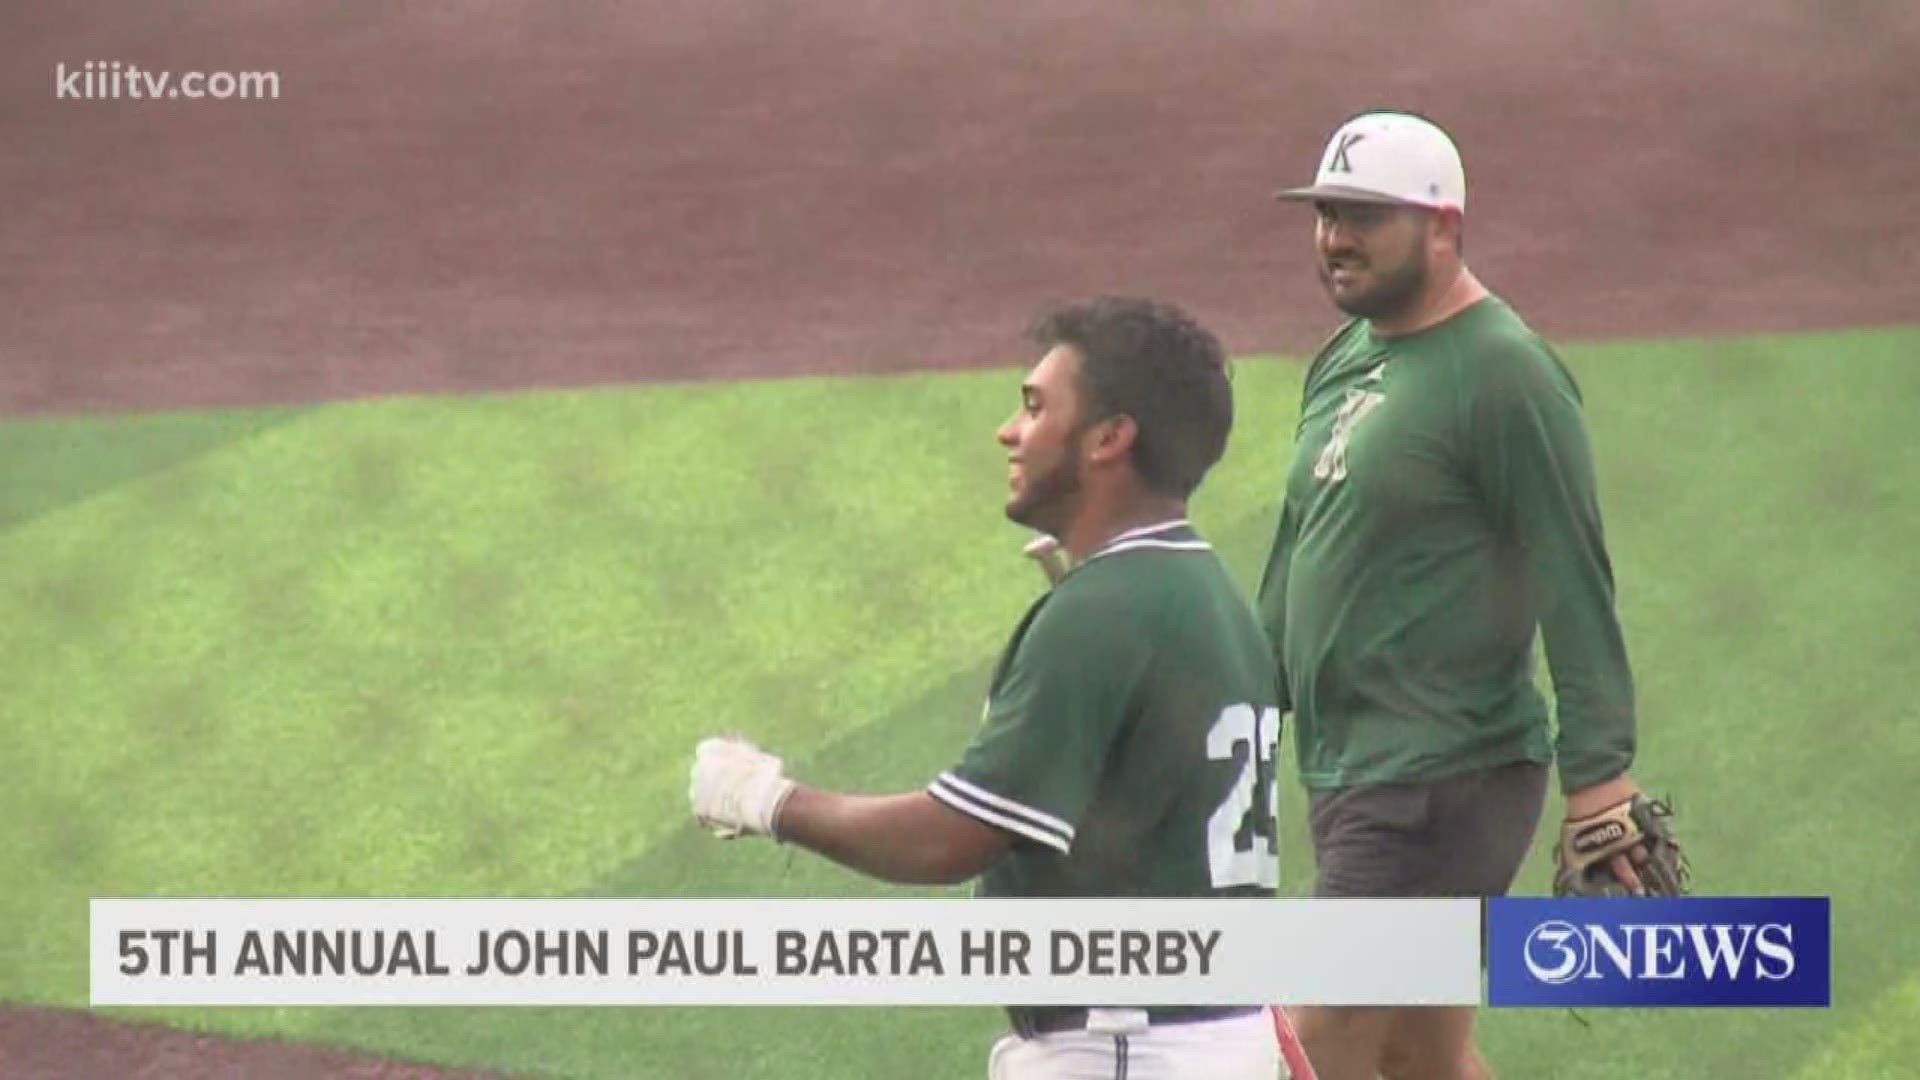 The fifth annual John Paul Barta derby was held Friday in honor of the former Flour Bluff Hornet killed in action in Iraq in 2006.